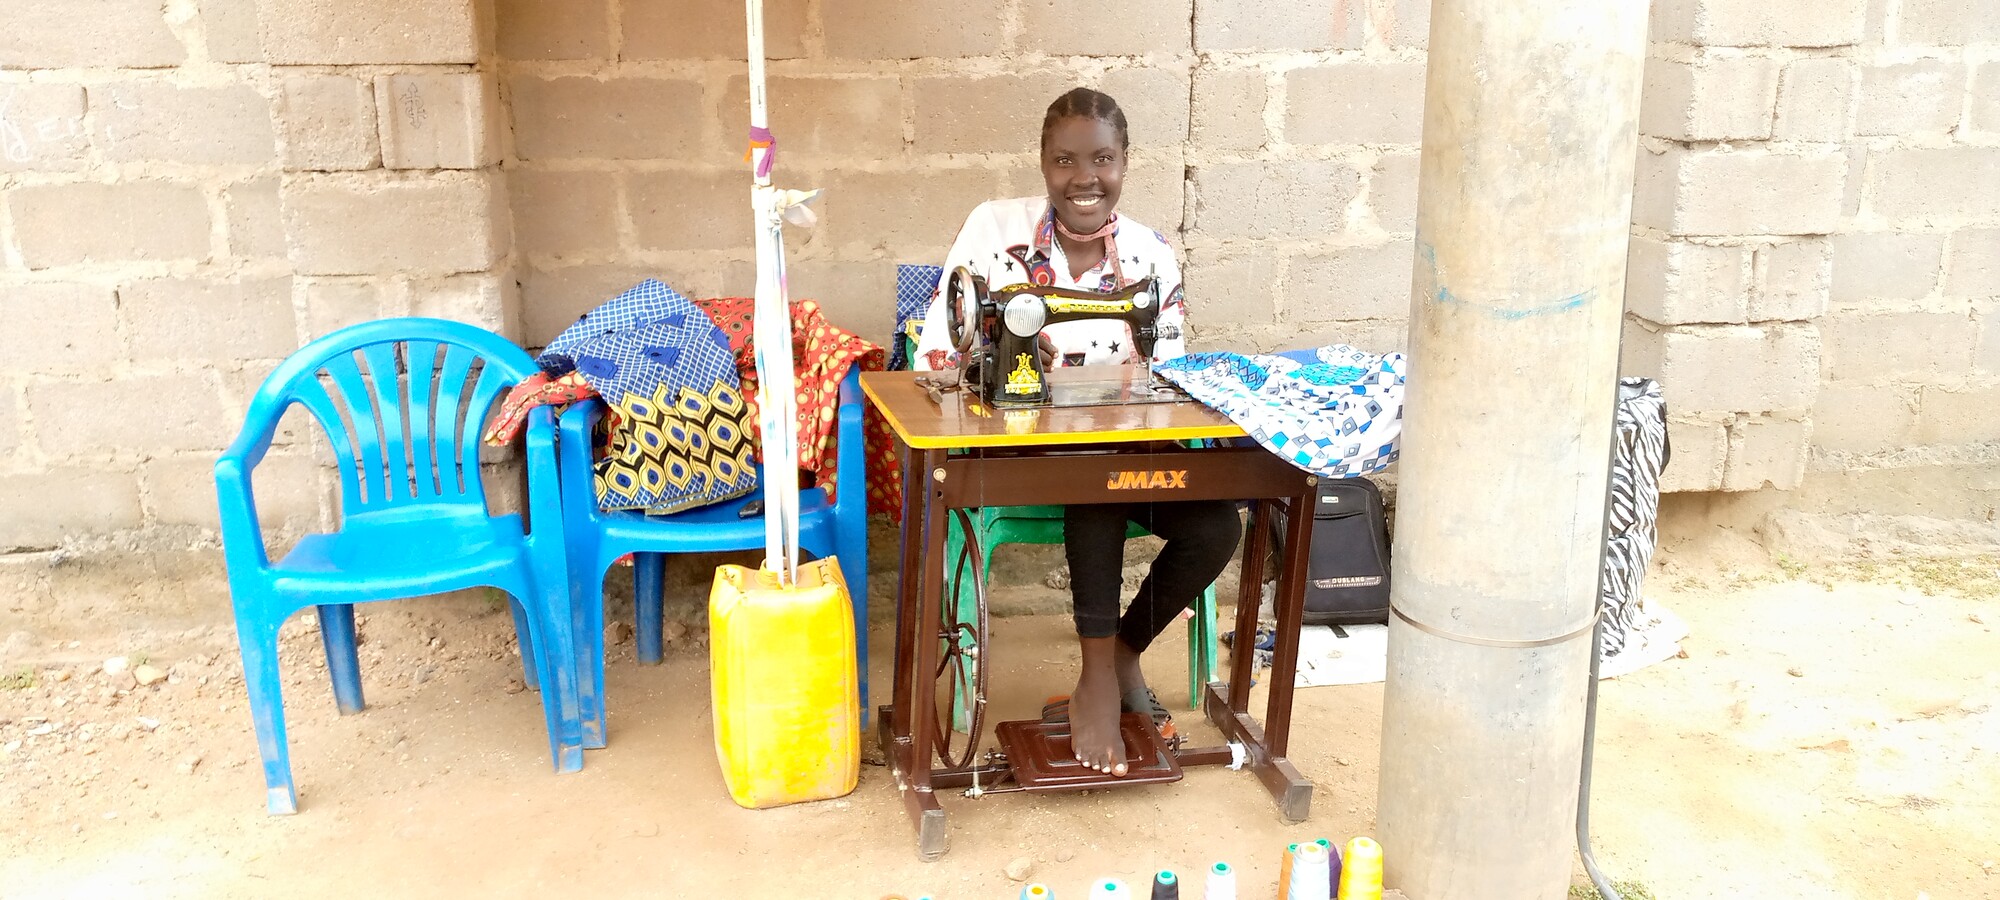 A person sits at a sewing machine and smiles at the camera